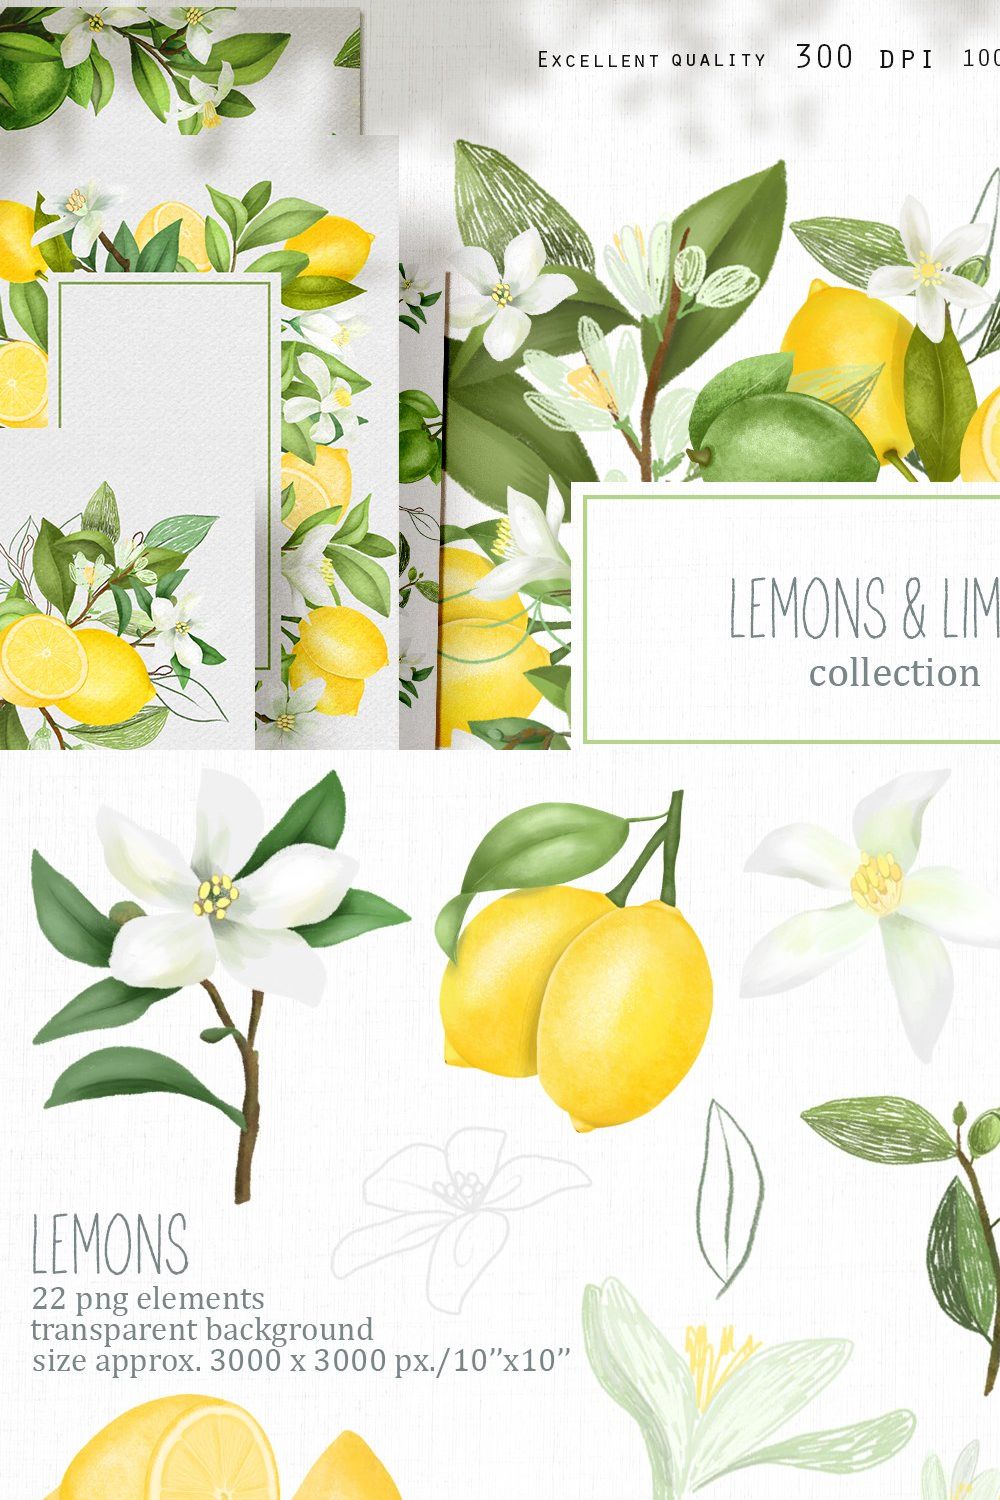 Lemons & limes collection pinterest preview image.